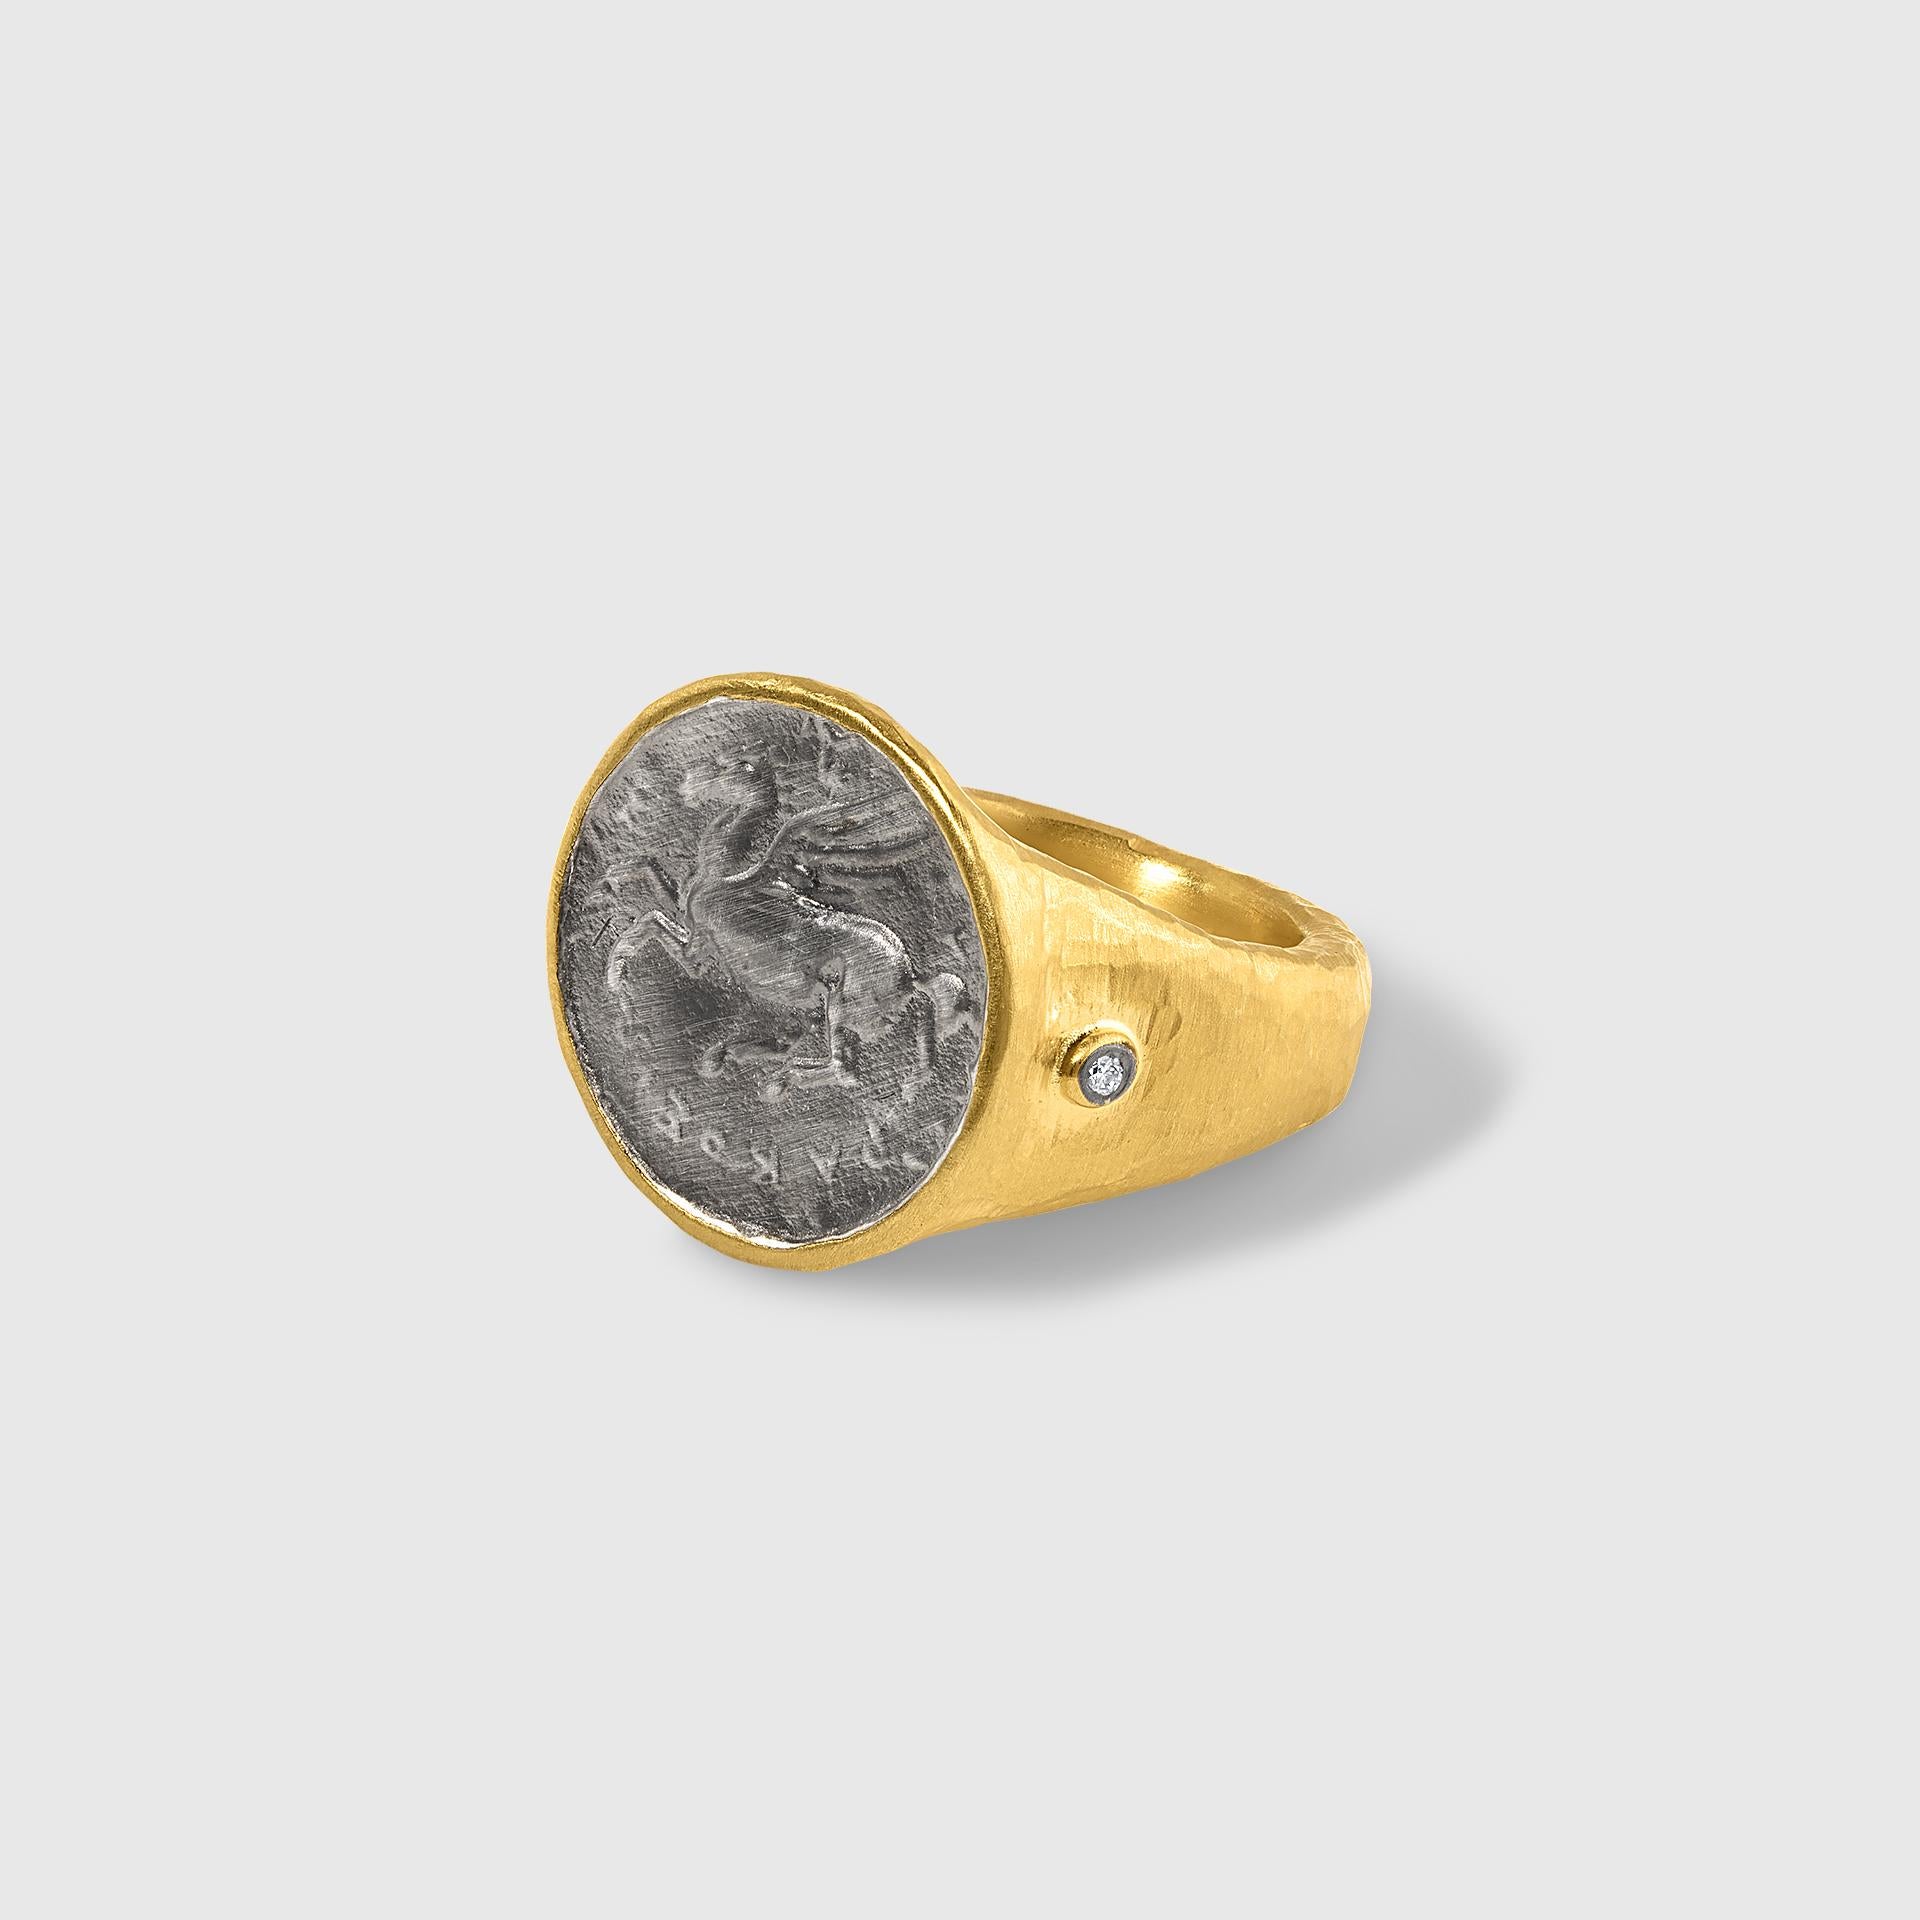 Byzantine Pegasus Coin Statement Cocktail Ring with Diamonds 24kt Yellow Gold and Silver B For Sale